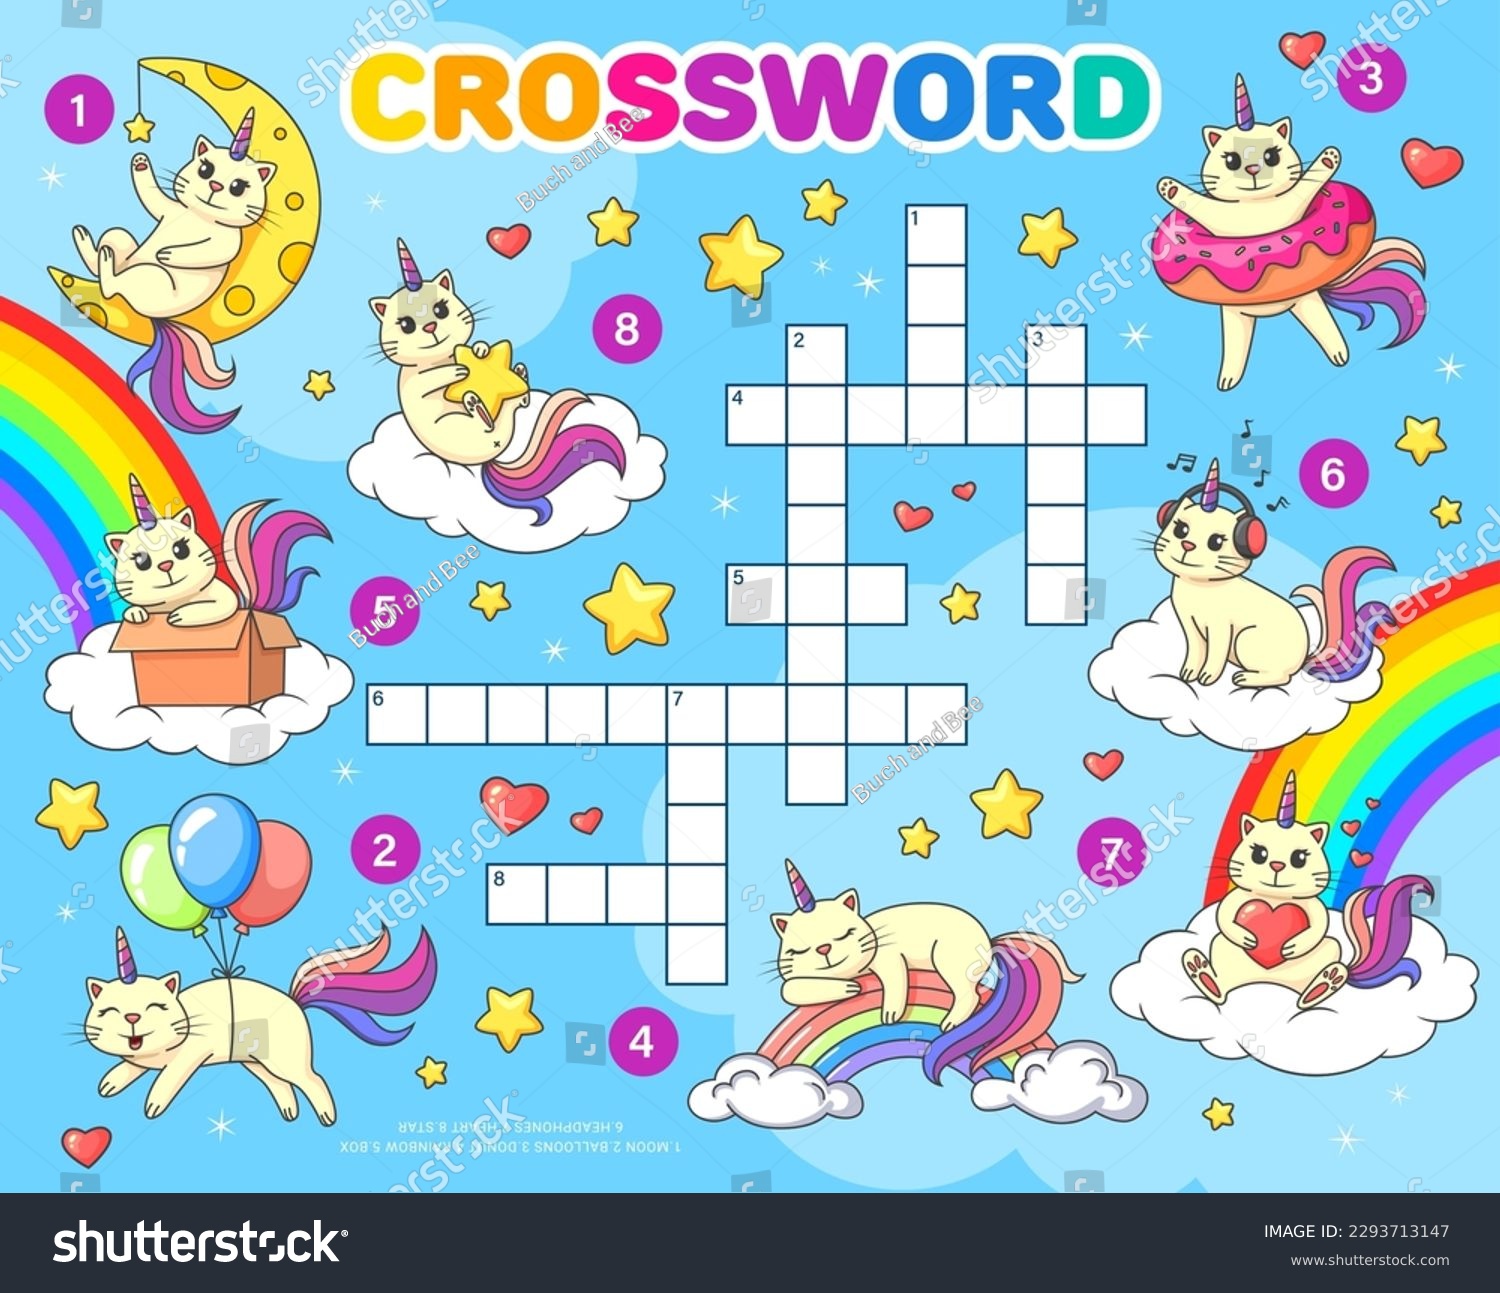 SVG of Crossword quiz game grid. Cartoon funny caticorn cats on rainbow. Vector cross word puzzle worksheet for kids with funny unicorn kittens with moon, balloons, donut and box. Heart, headphones, or stars svg